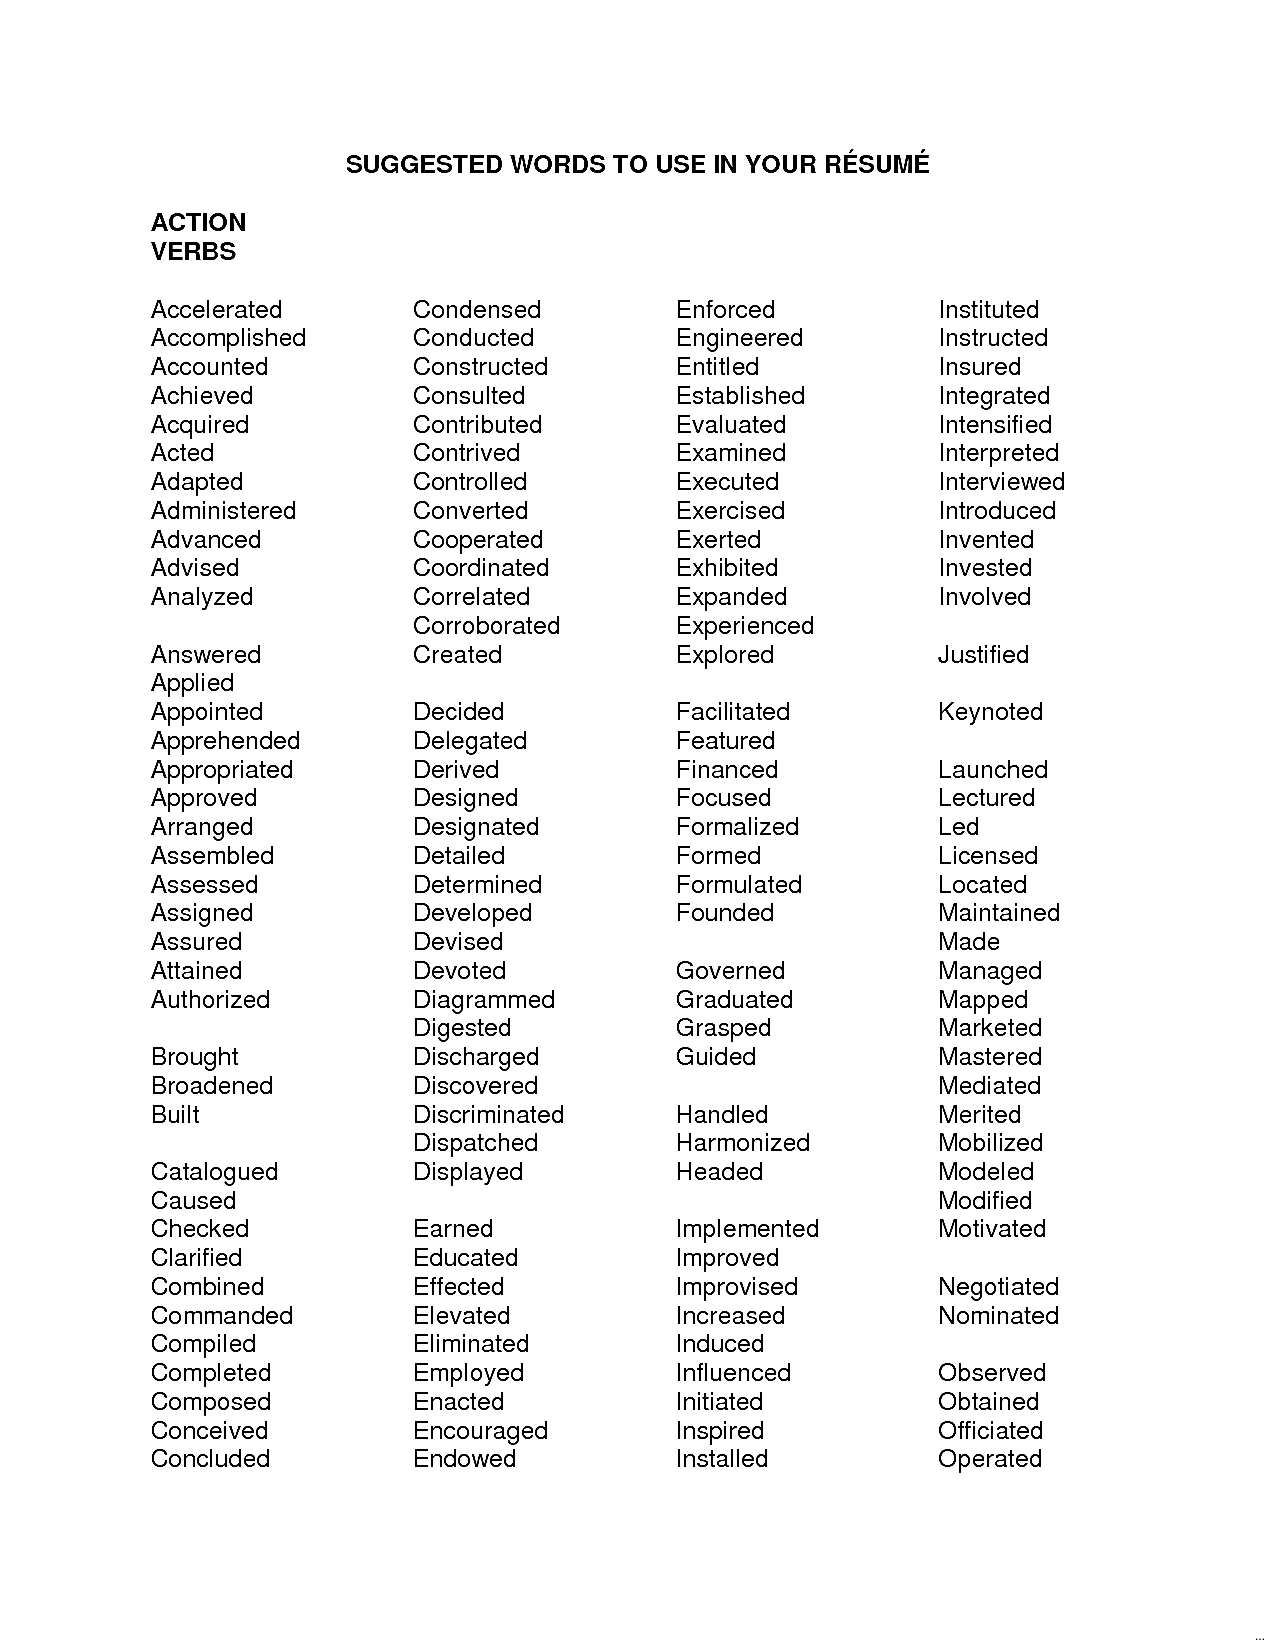 Resume Action Words  Action Words For Resume Resumes Poz Divine Photo Powerful Verbs 1275